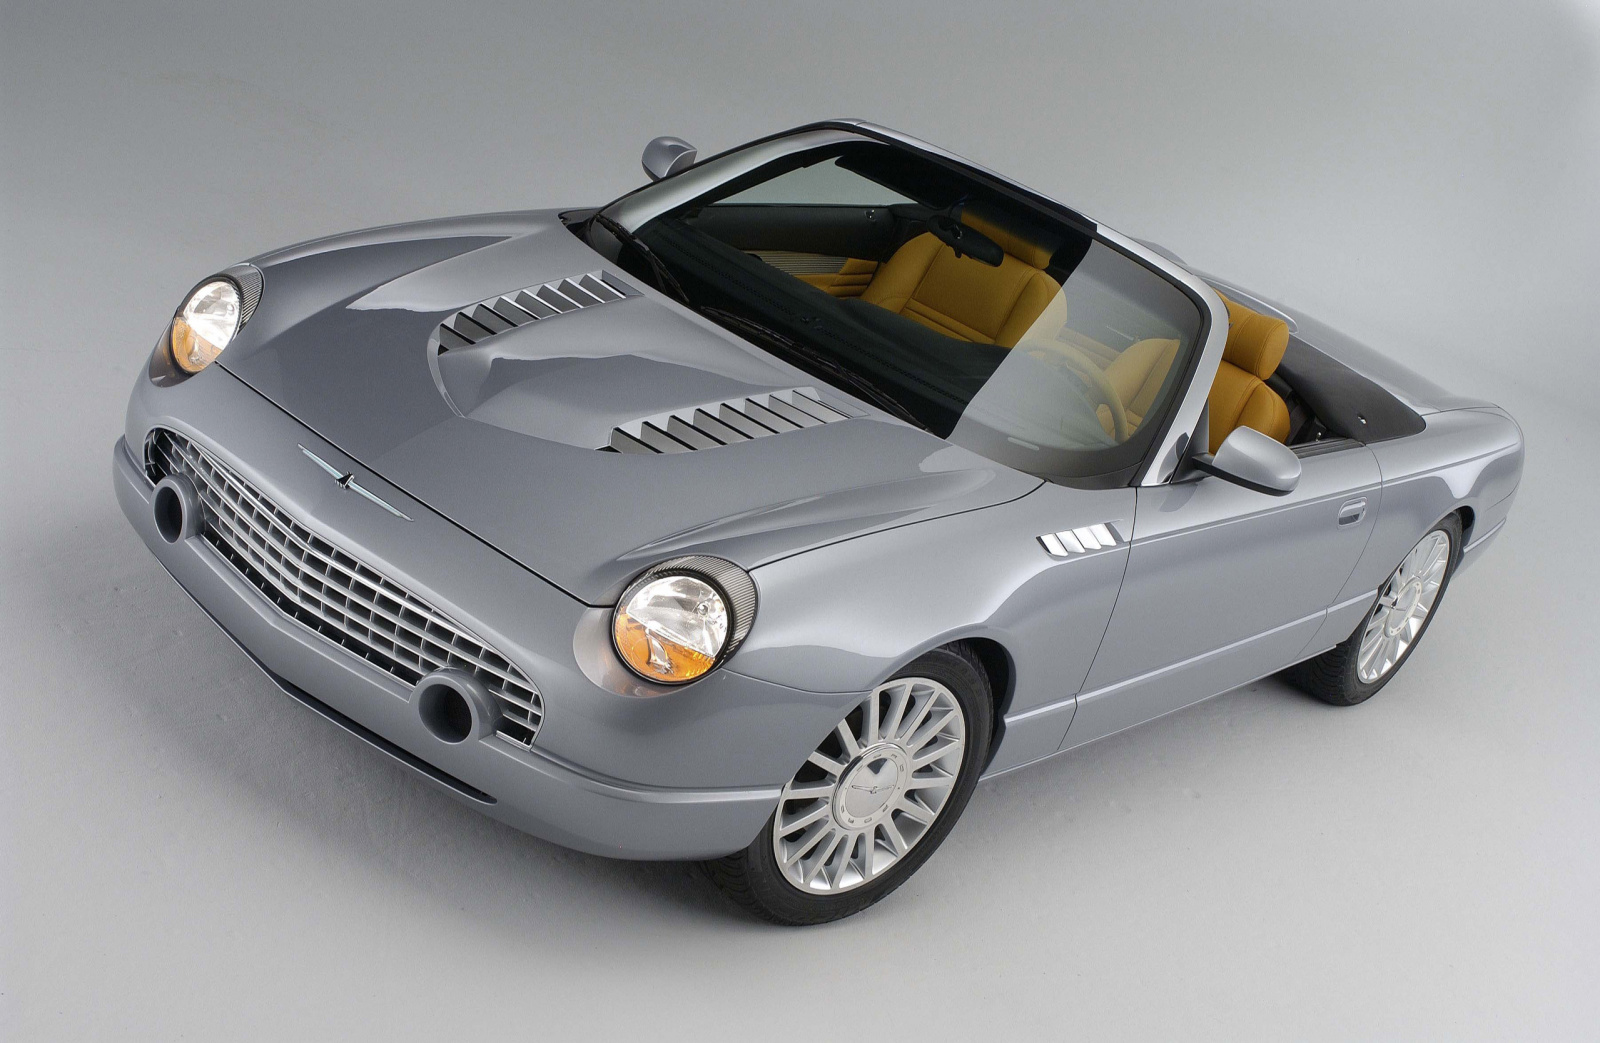 Ford Supercharged Thunderbird Concept - Foto eines Ford Concept-Cars